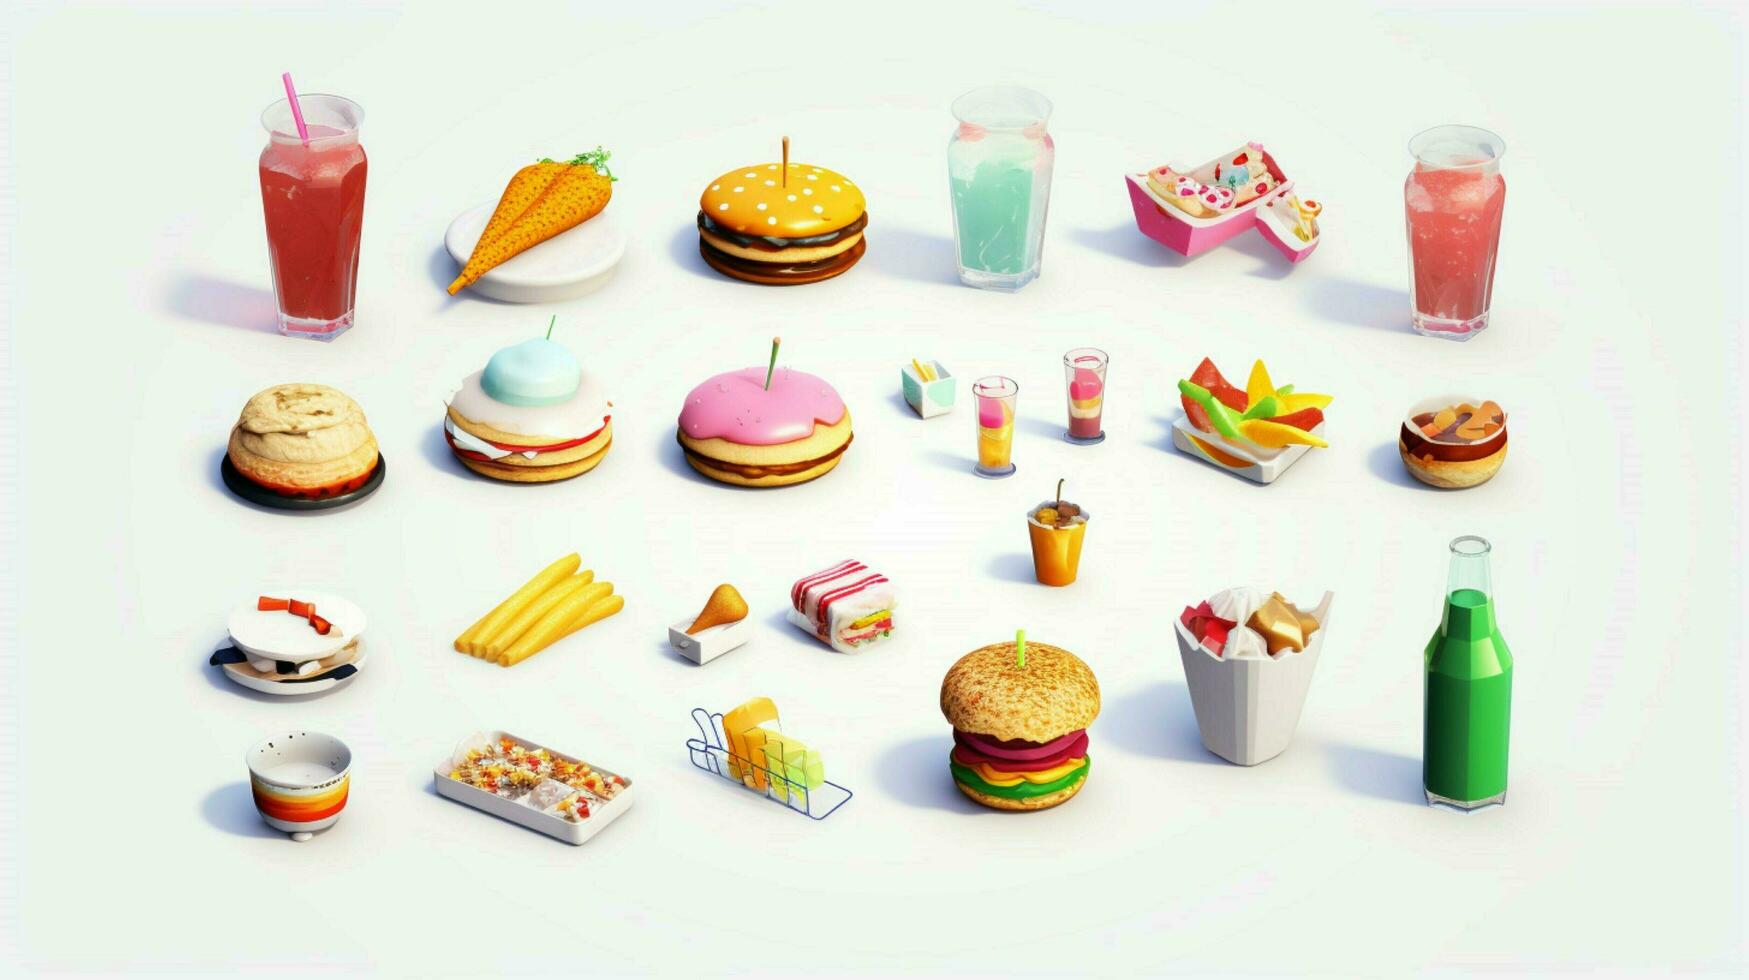 Colorful 3D Icon Sets of food and beverage indust photo